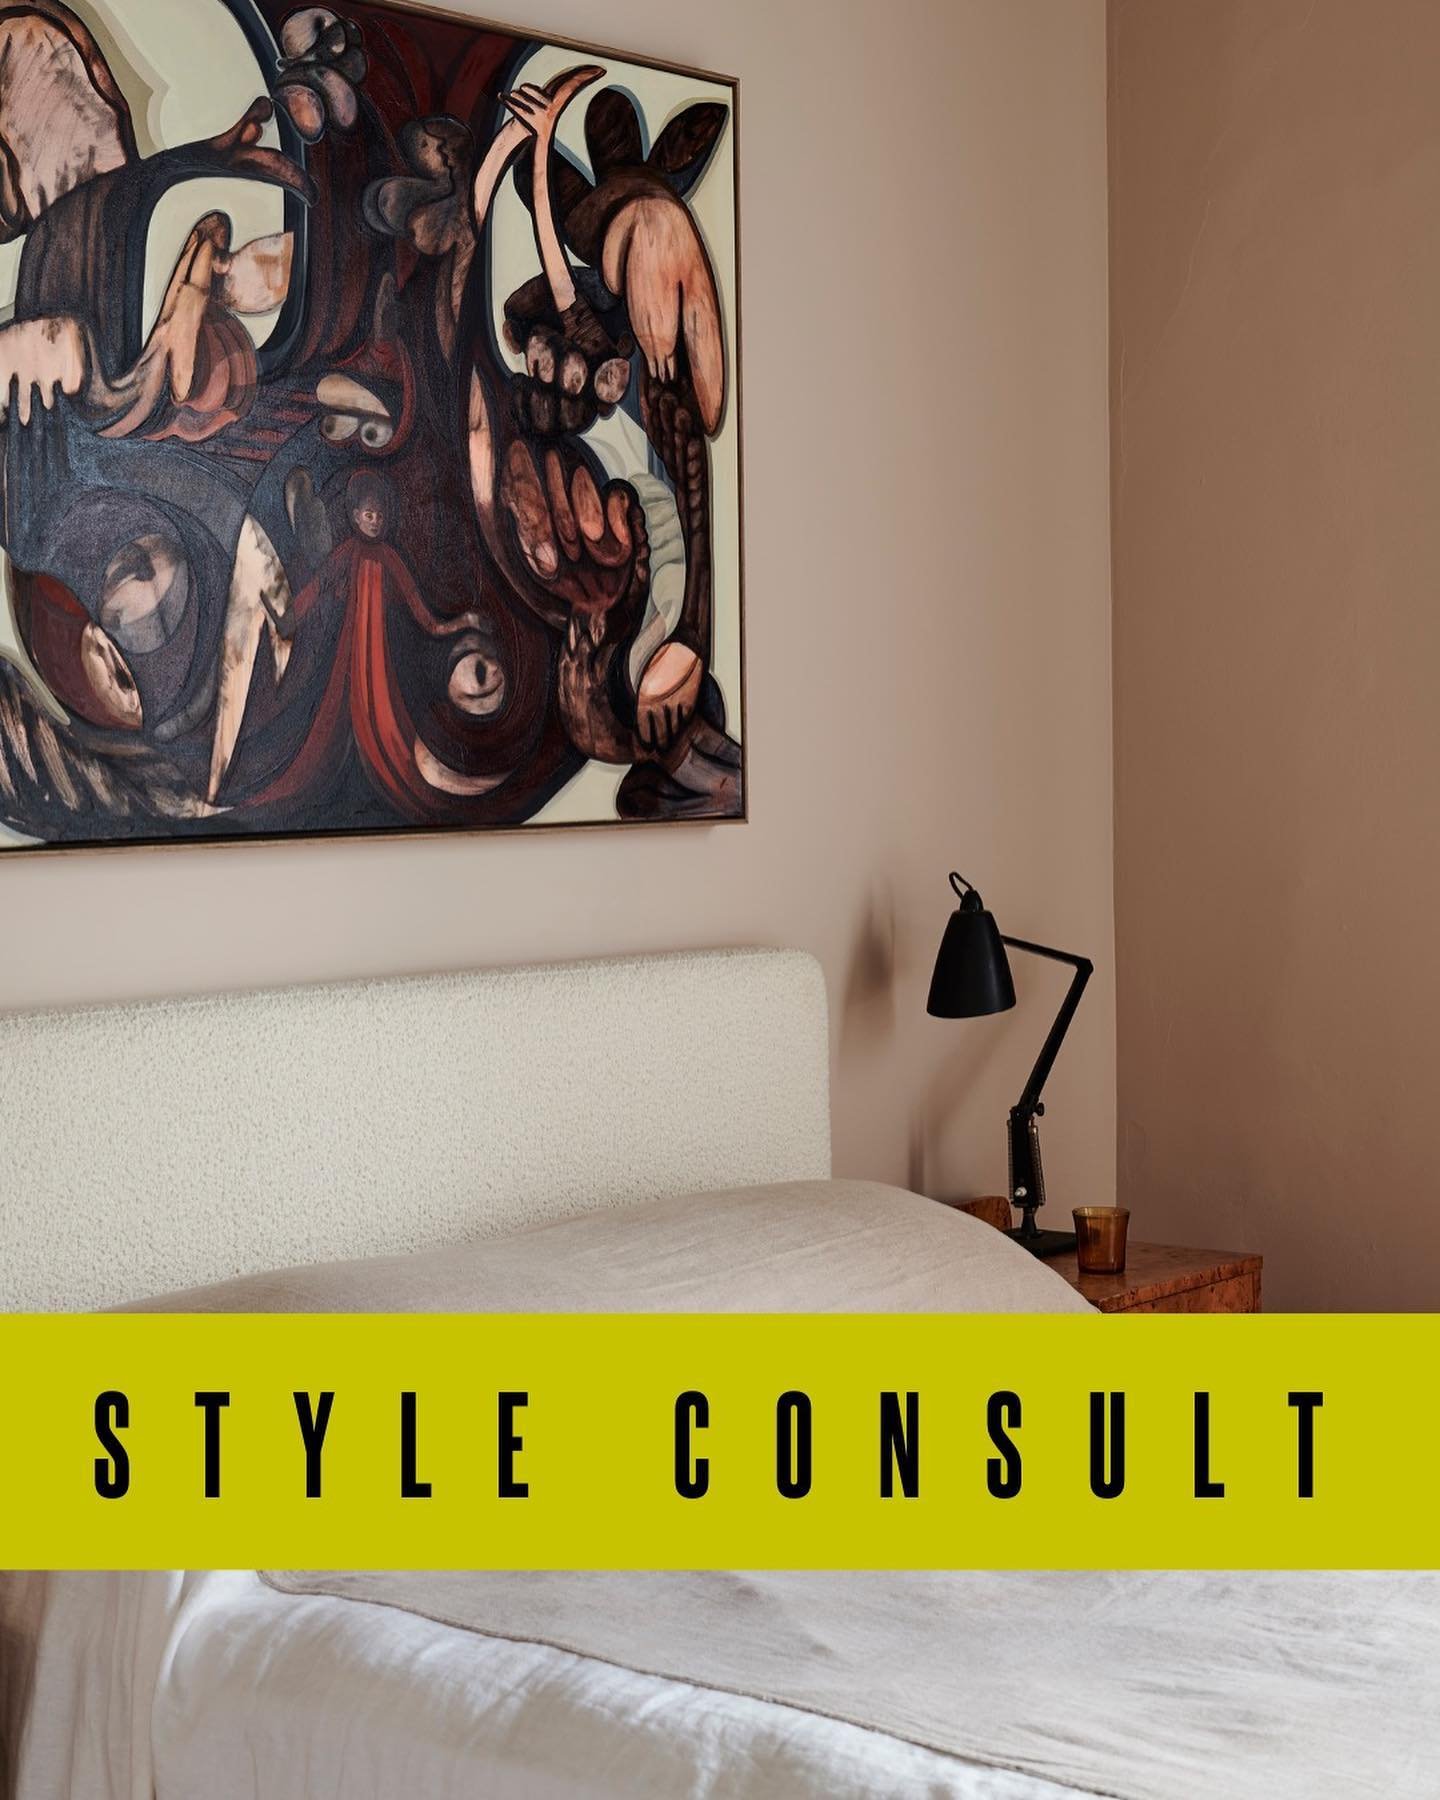 STYLE CONSULTS

Phew! Quite a few new pals here (600+ to be precise). Hi! Super grateful to&nbsp;@thedesignfiles for introducing us.&nbsp;🙏🏼

Thought I&rsquo;d share more about how we can create gorgeous spaces together. Beyond my full-service inte